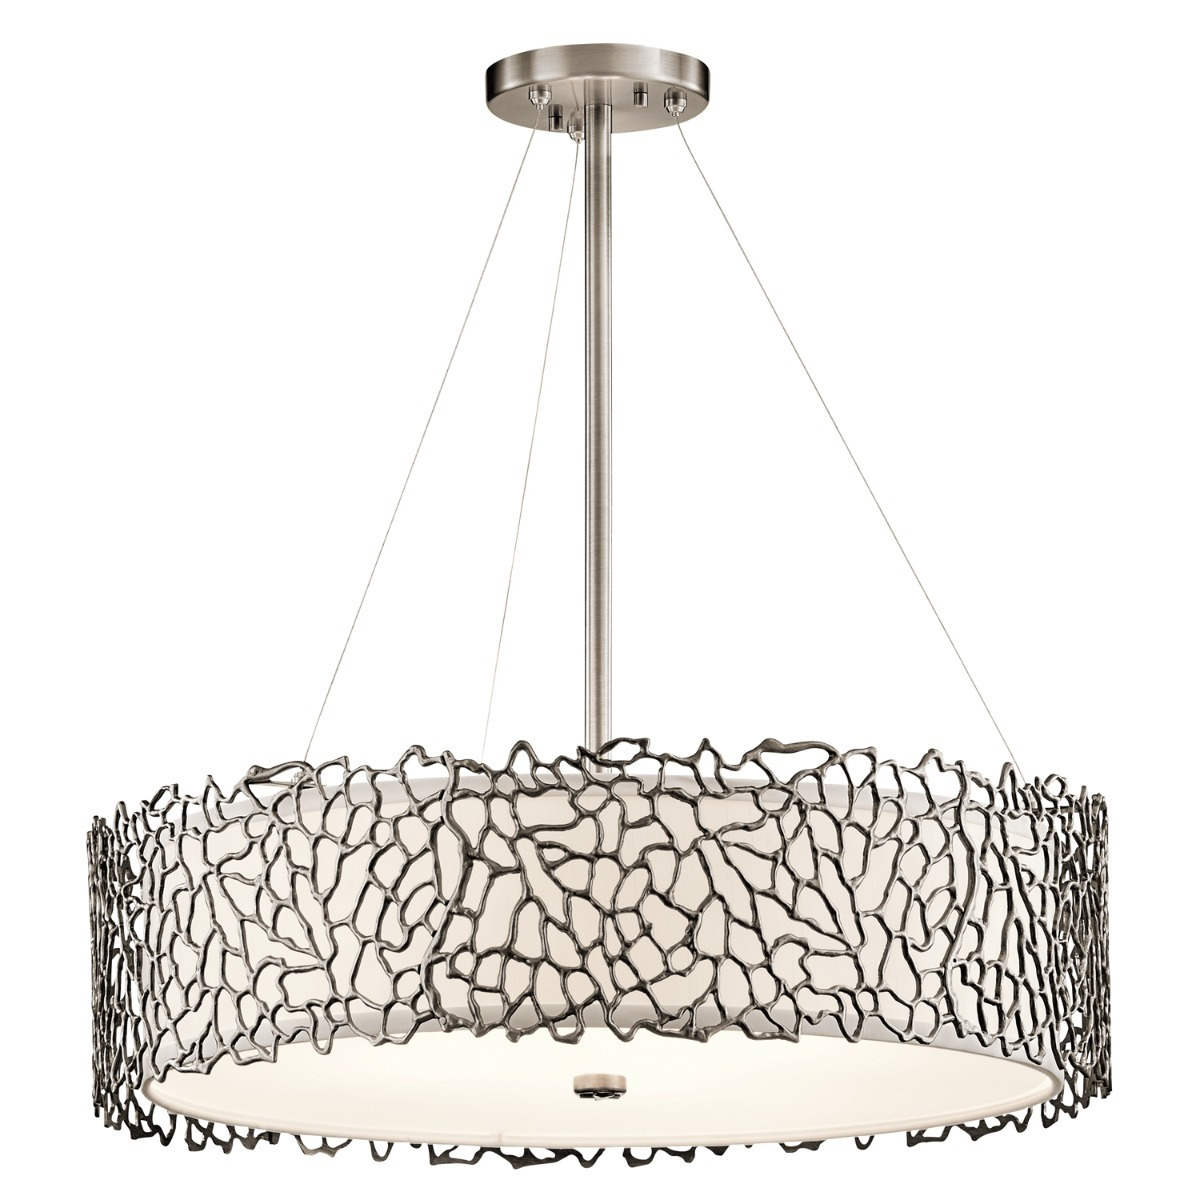 KL-SILVER-CORAL-P-B Silver Coral Large Pendant Ceiling Light